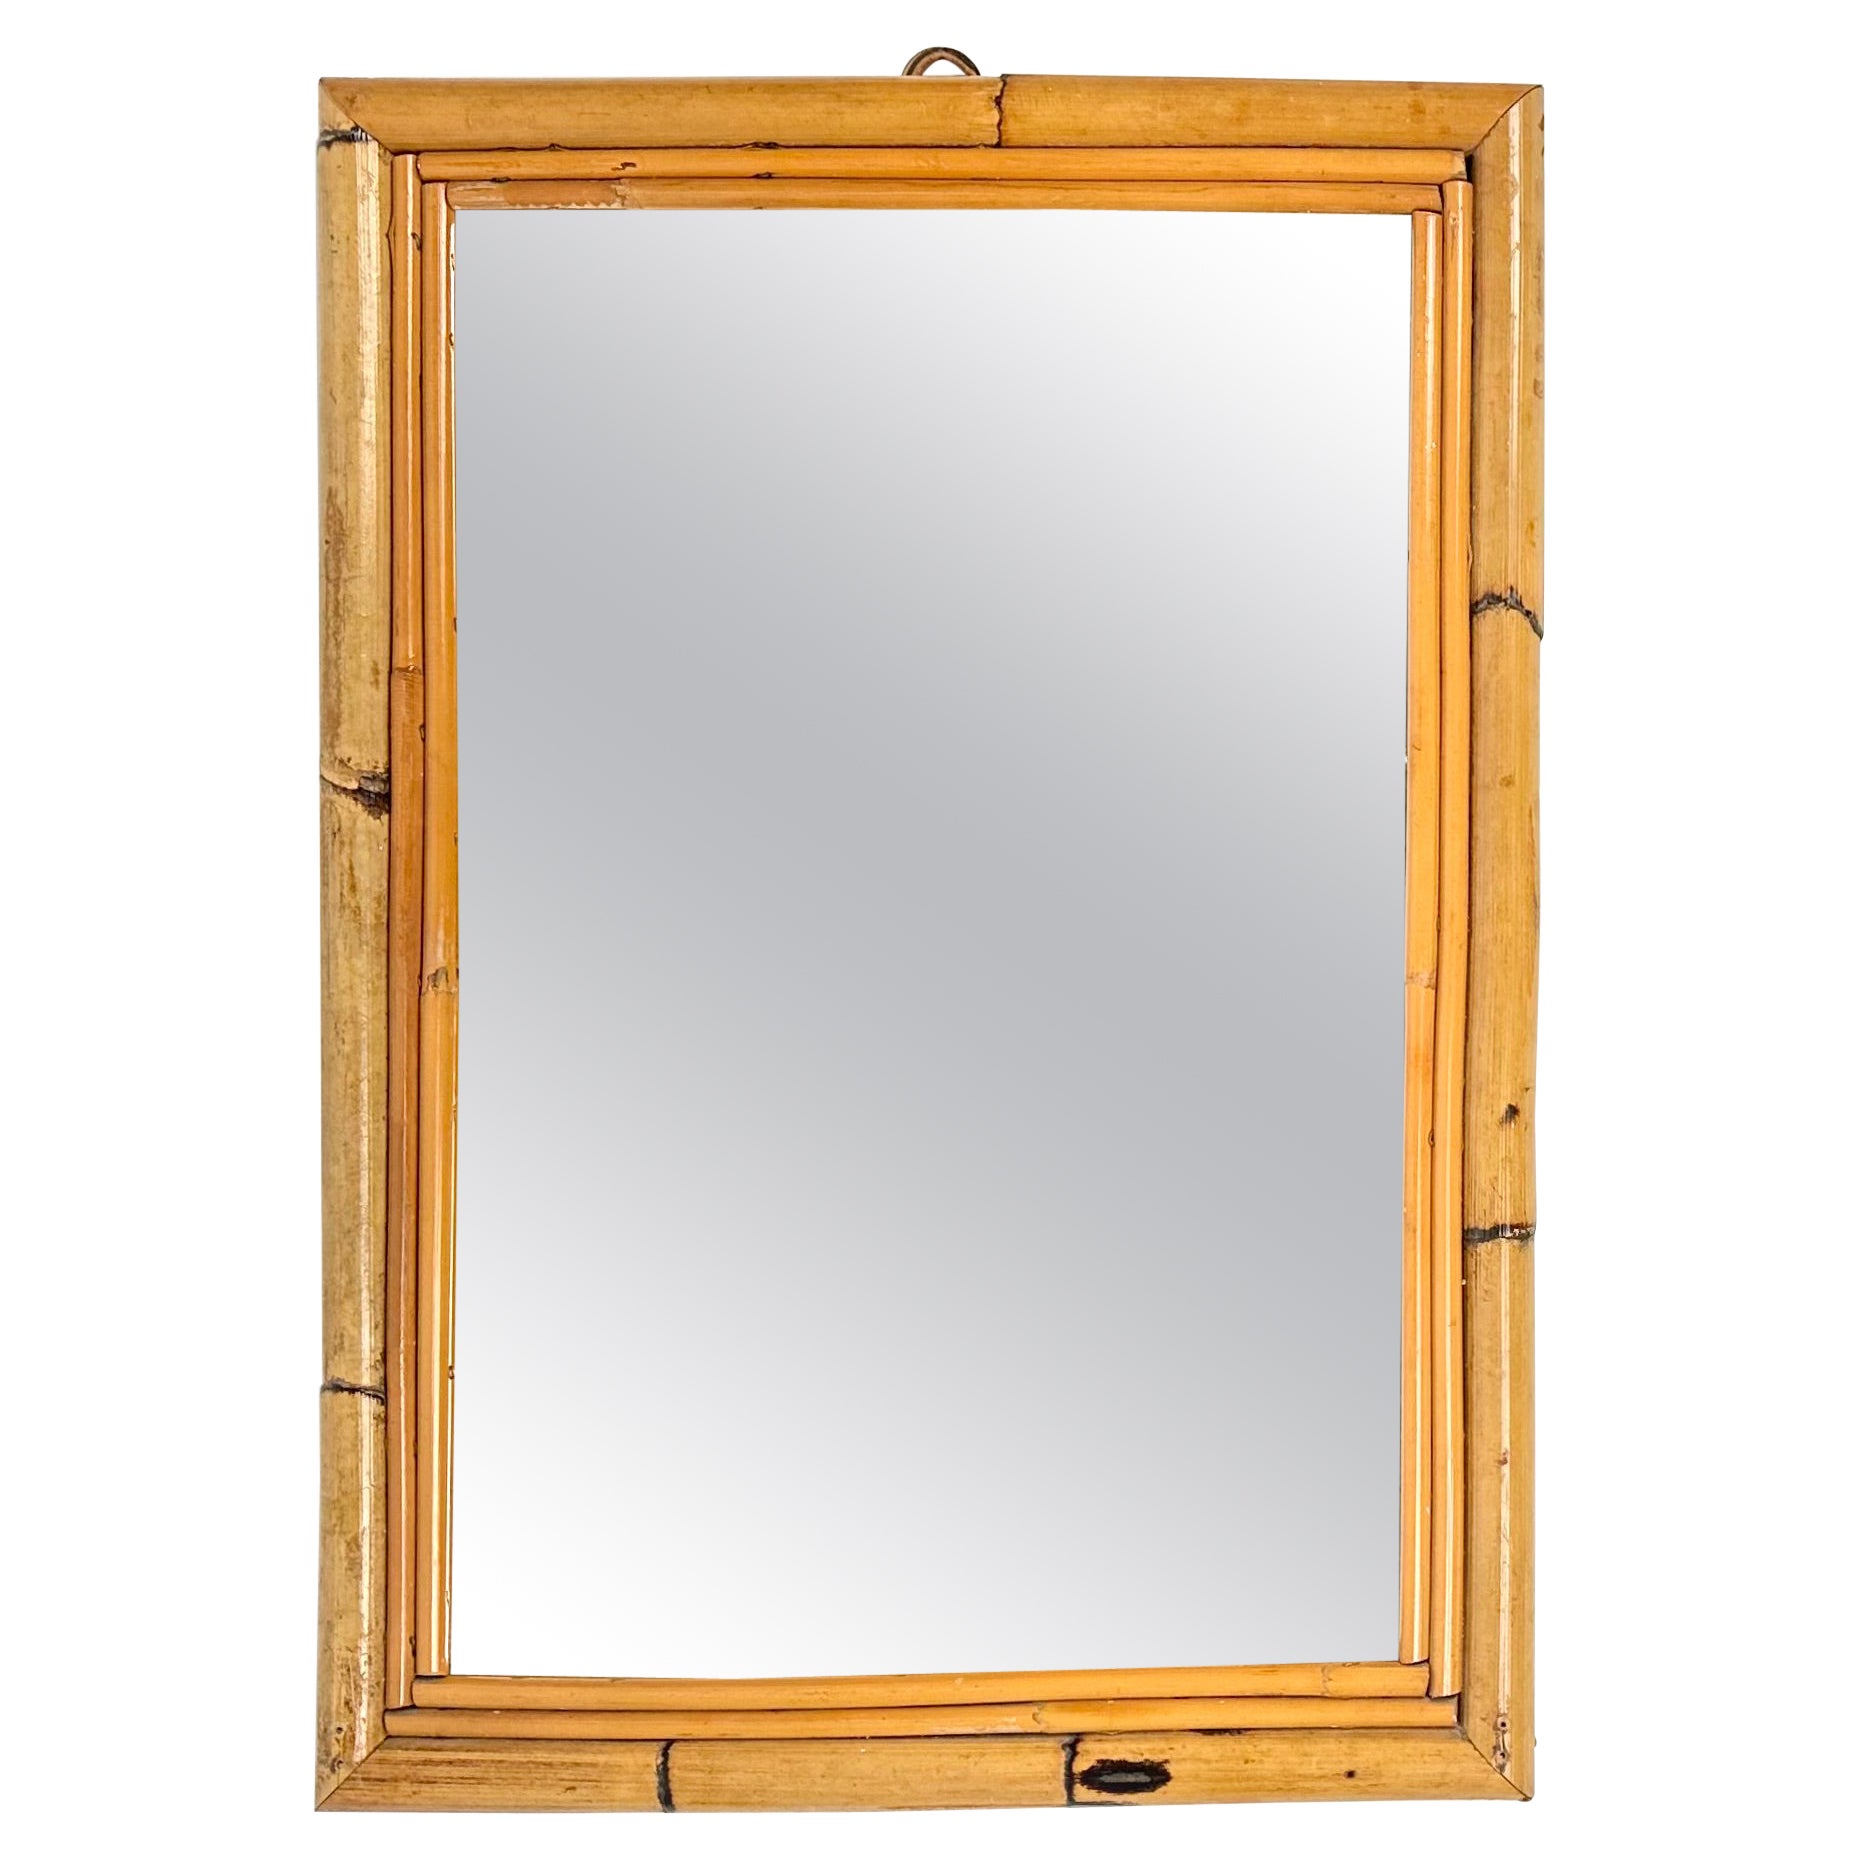 Midcentury Rectangular Wall Mirror in Bamboo, Italy 1970 For Sale